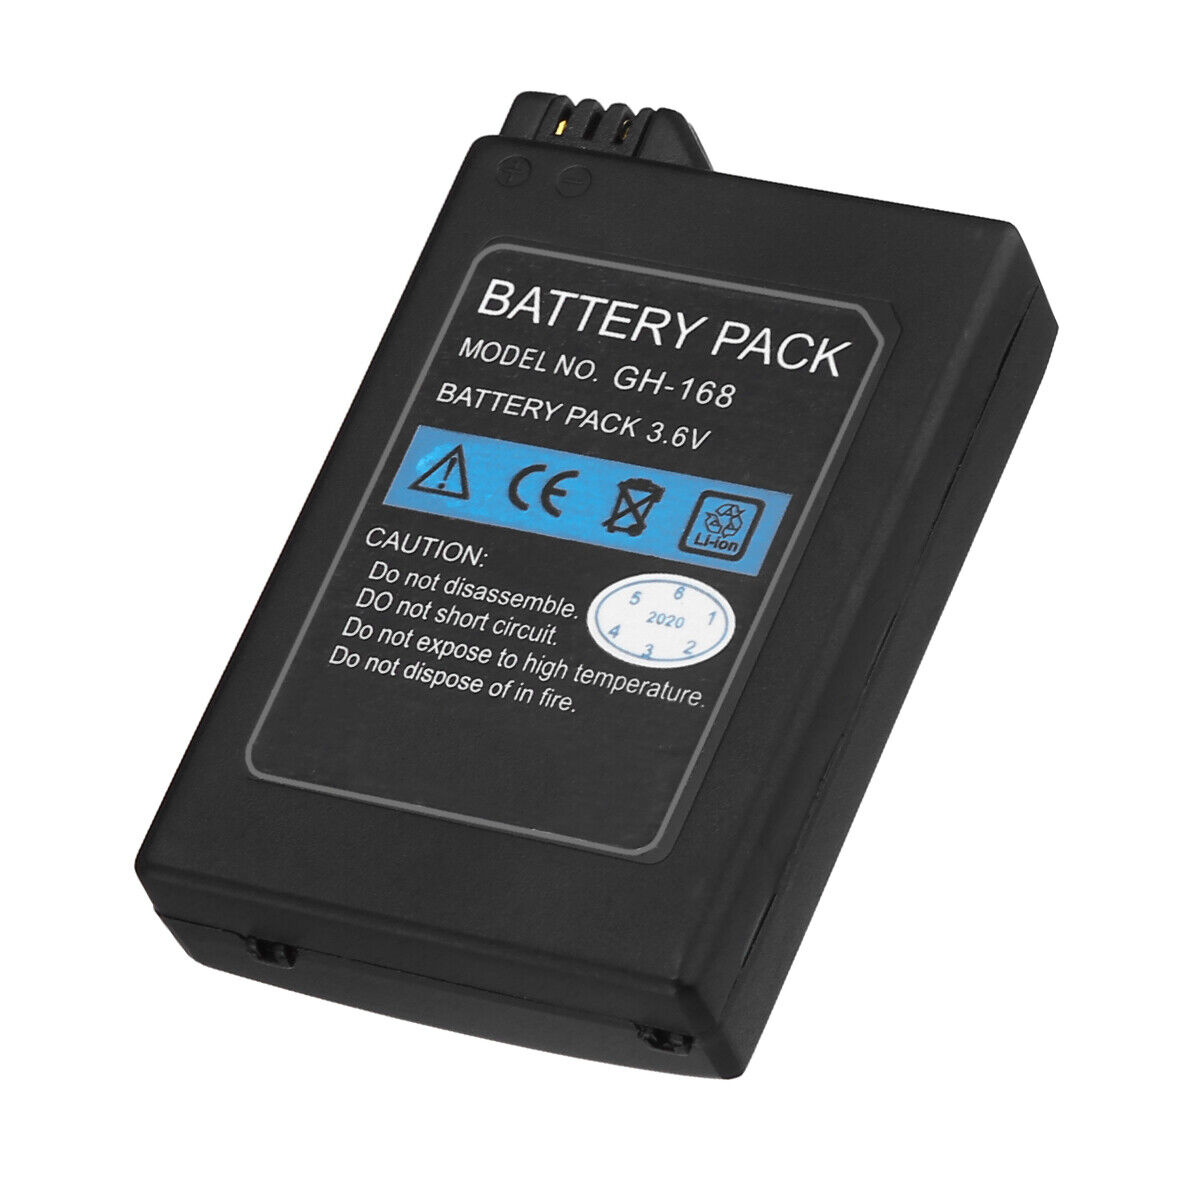 2 Pack - 3600mAh Replacement Battery Packs for Sony PSP PSP-1000 1000 1001 Unbranded Does not apply - фотография #12